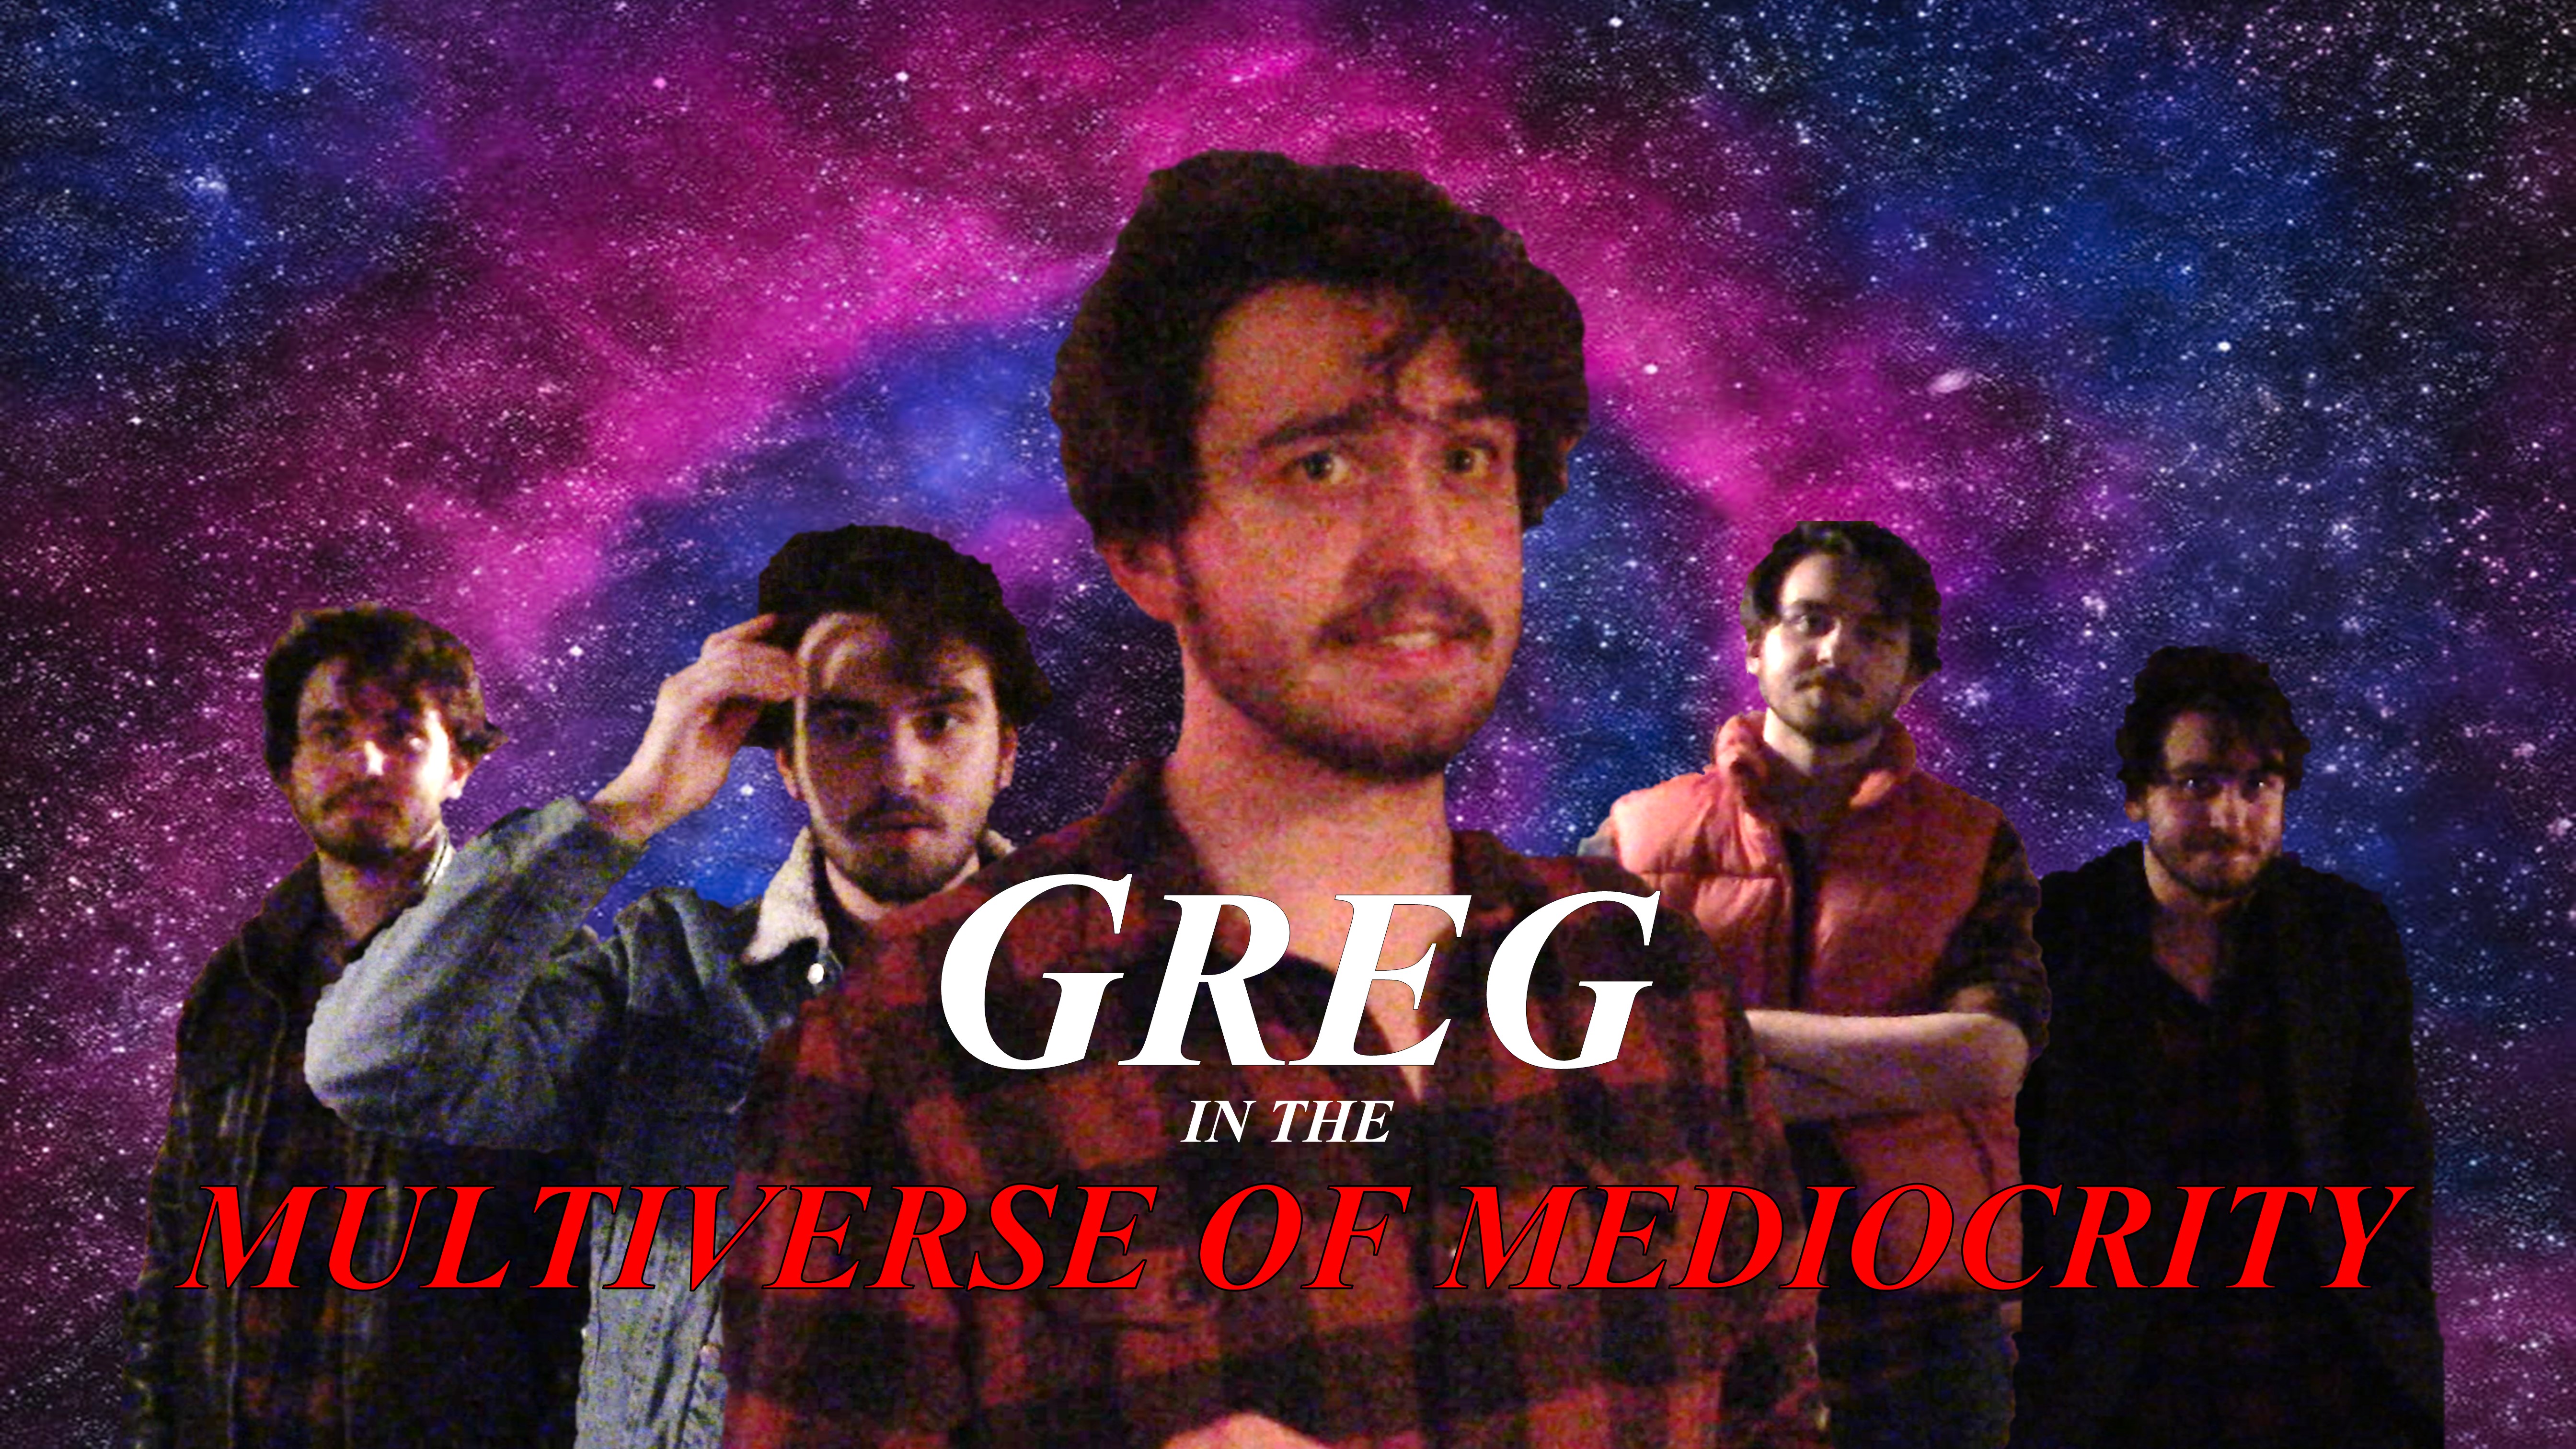 Greg in the Multiverse of Mediocrity